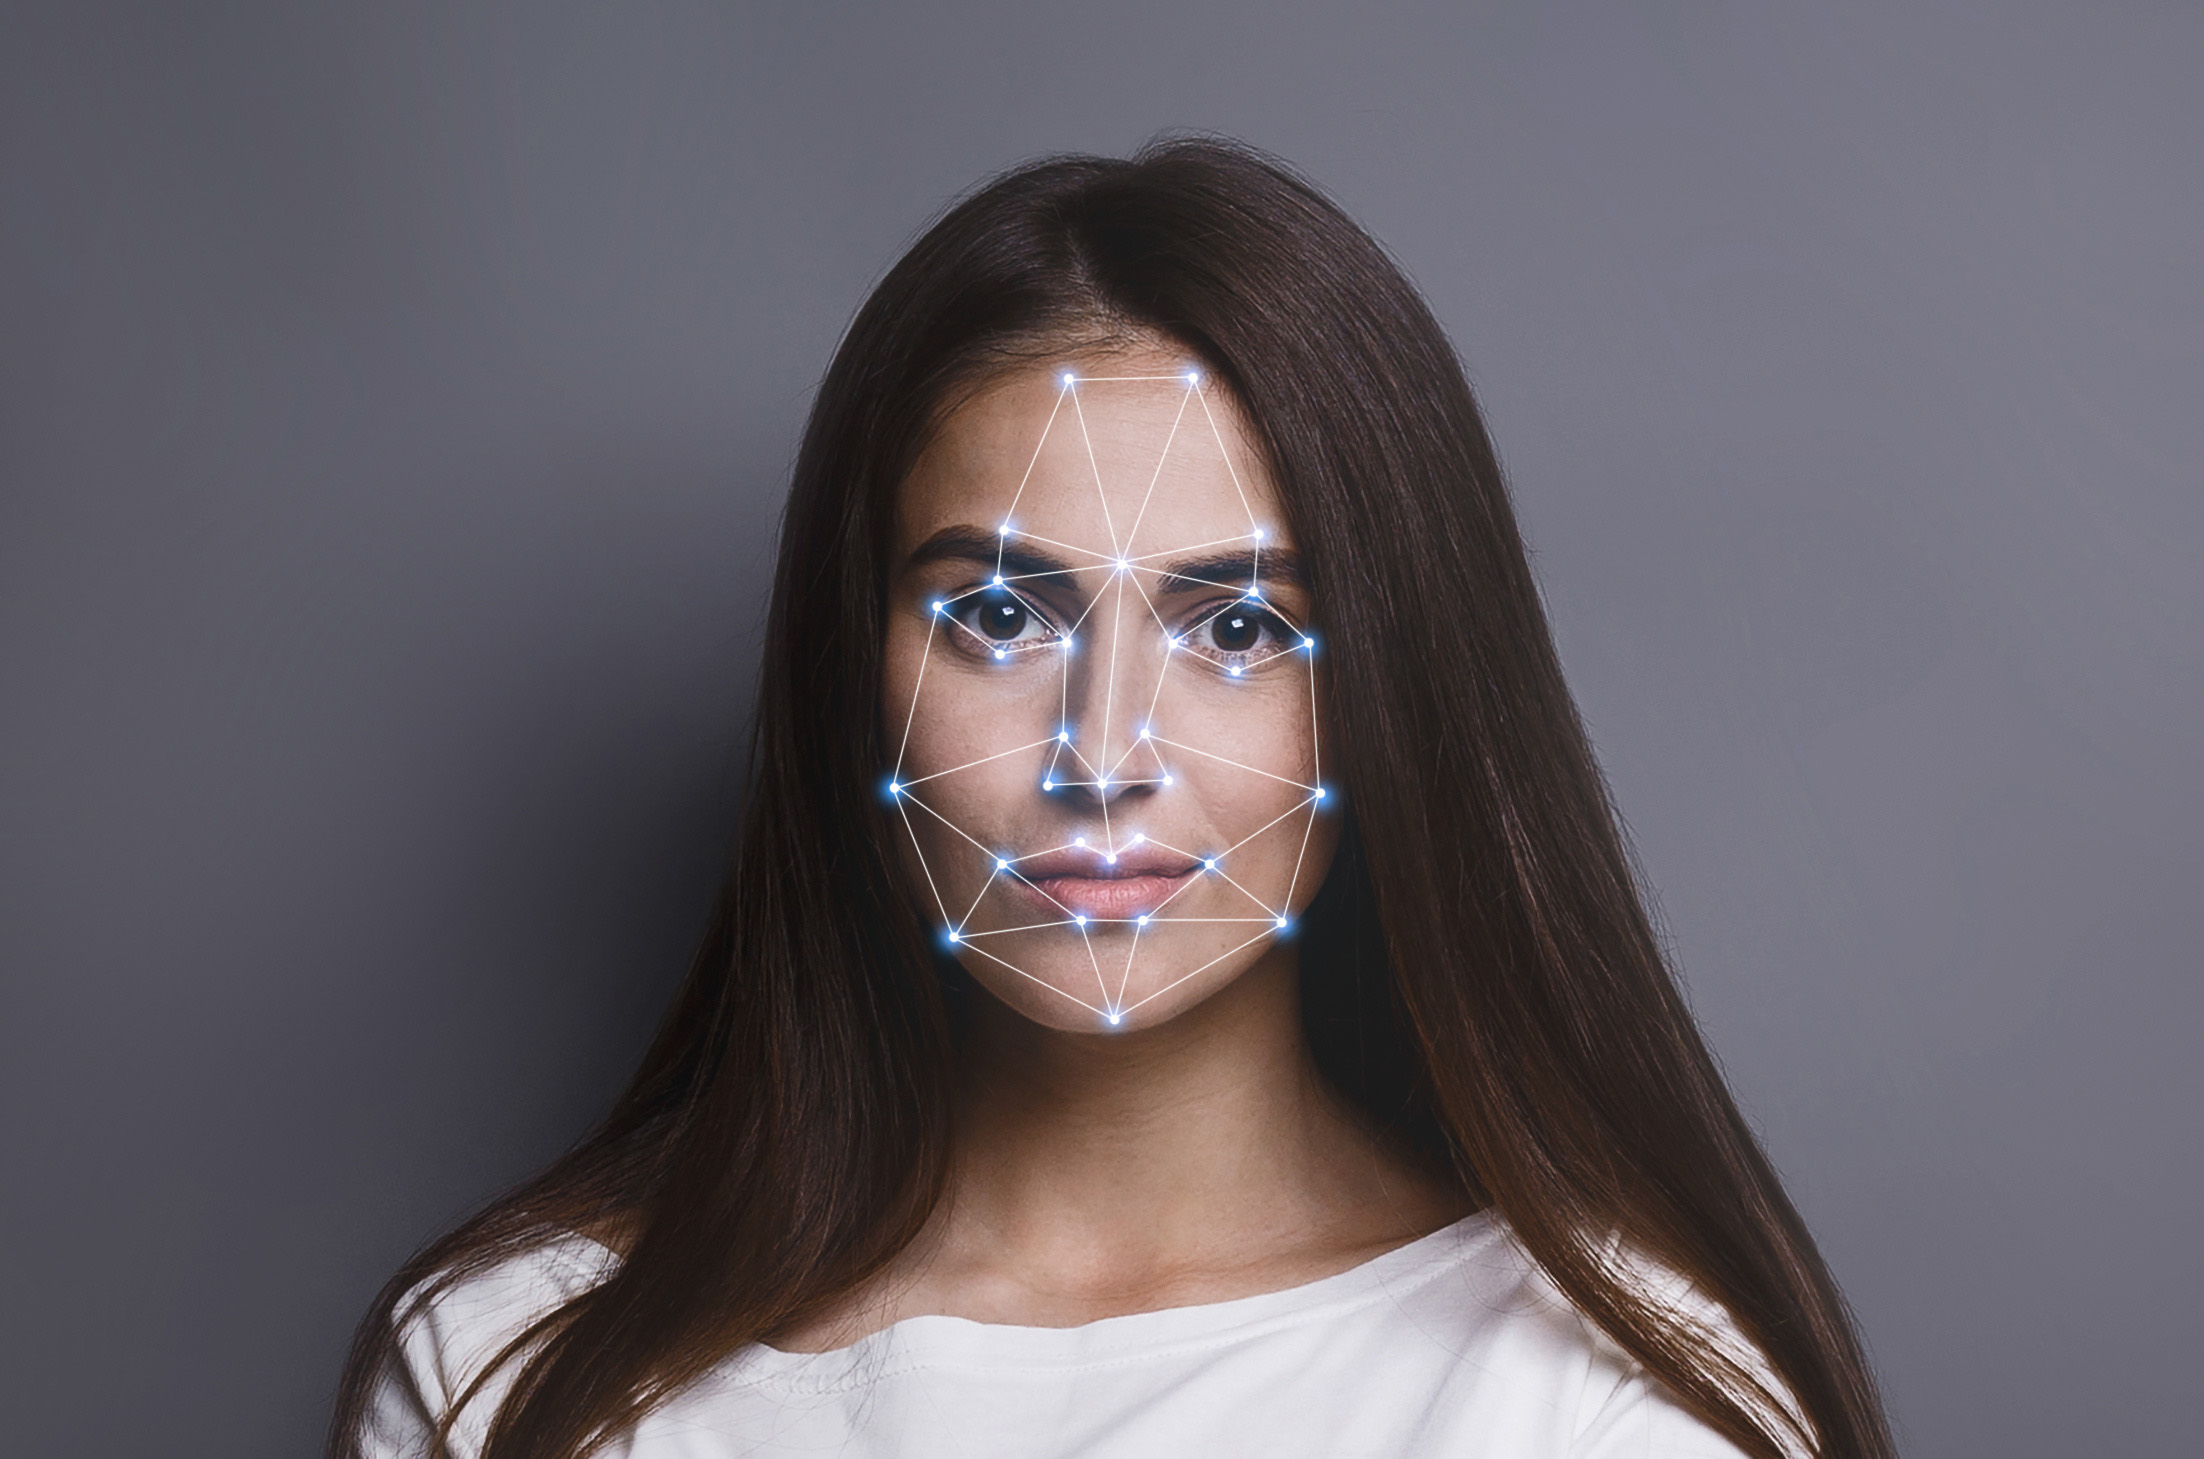 Patient identification face scan biometric technology